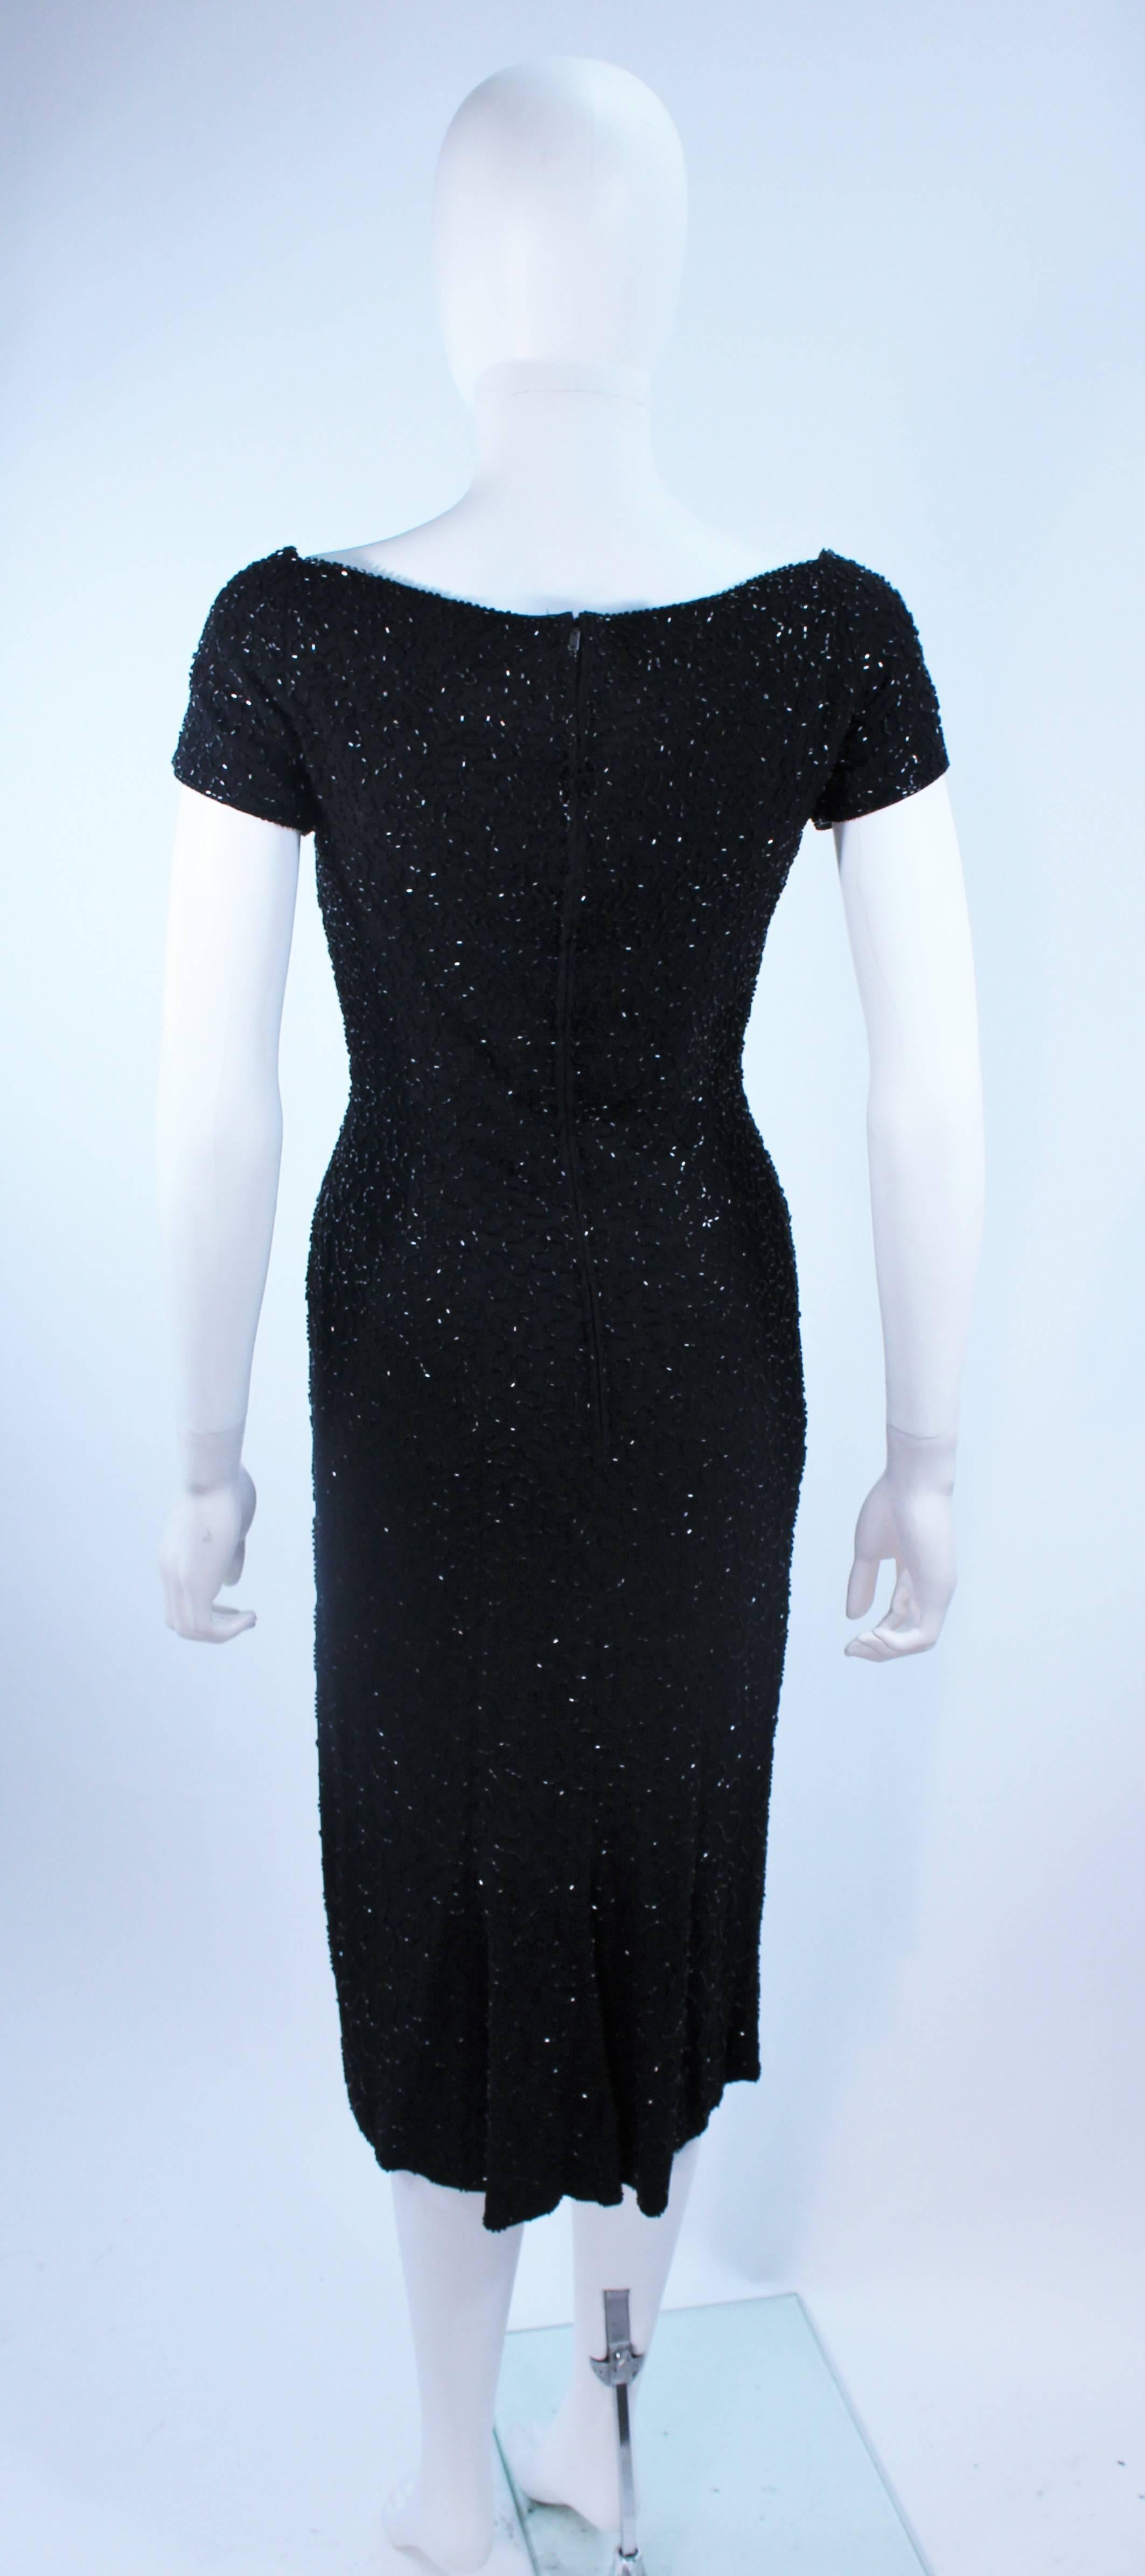 CEIL CHAPMAN Black Beaded Cocktail Dress with Square Neckline Size 2 For Sale 5